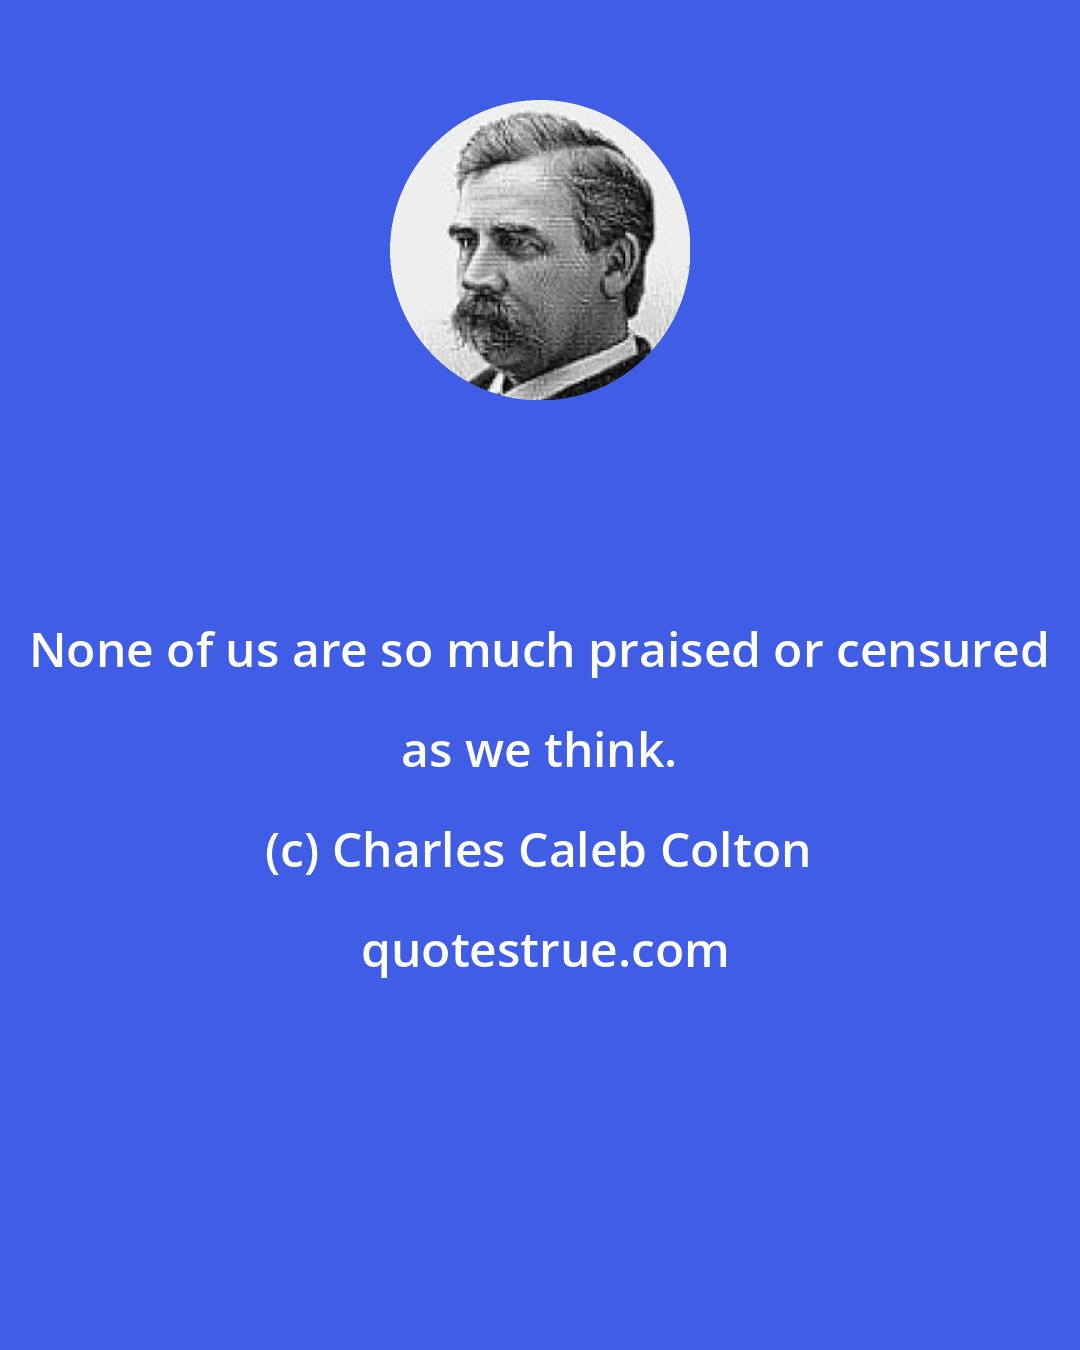 Charles Caleb Colton: None of us are so much praised or censured as we think.